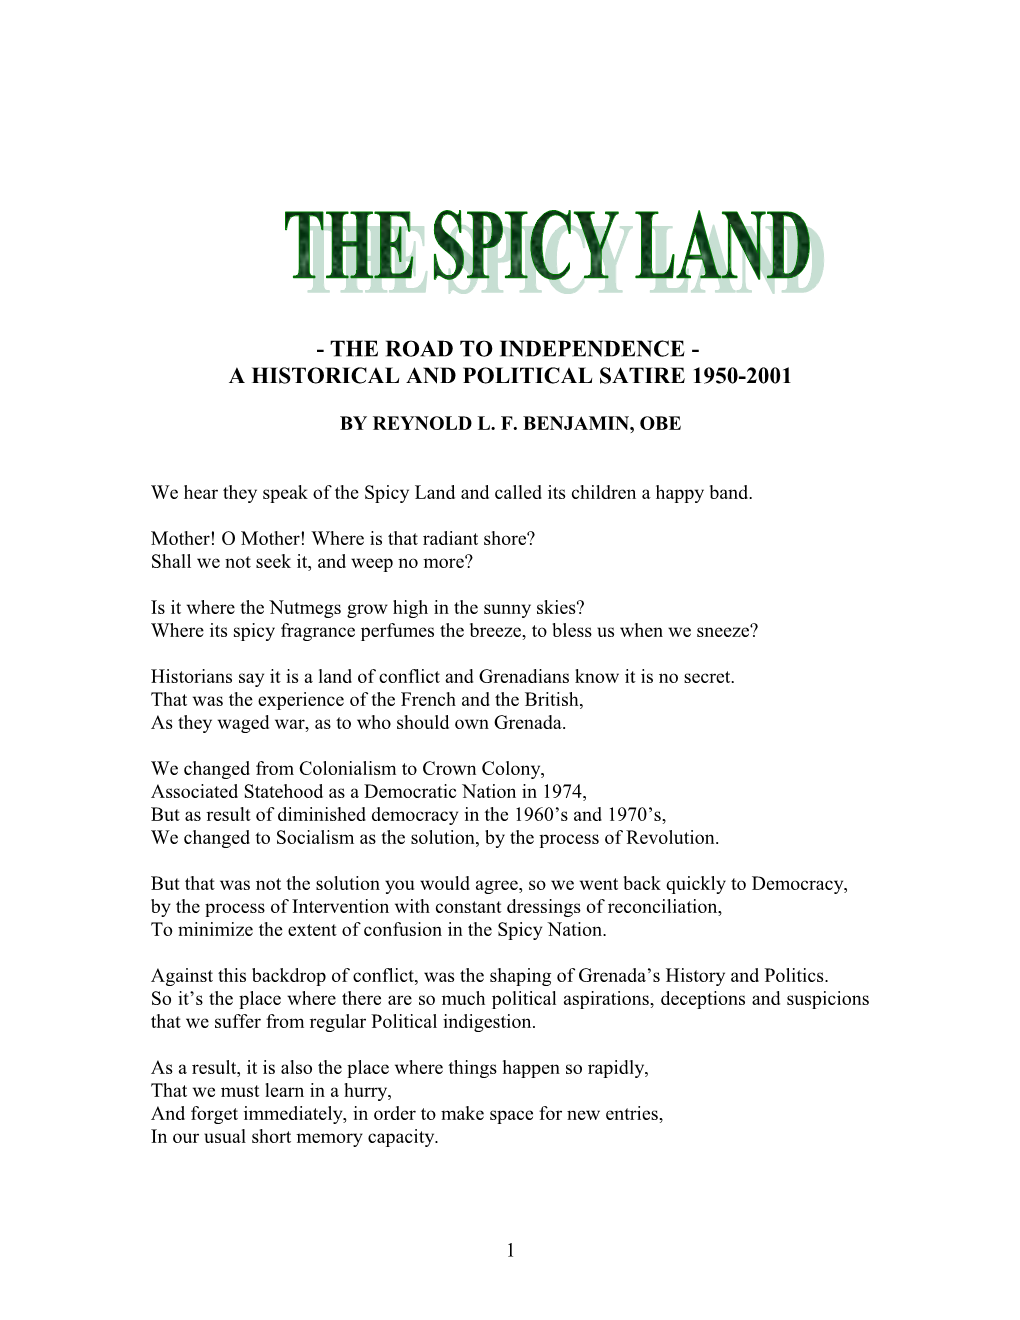 The Spicy Land